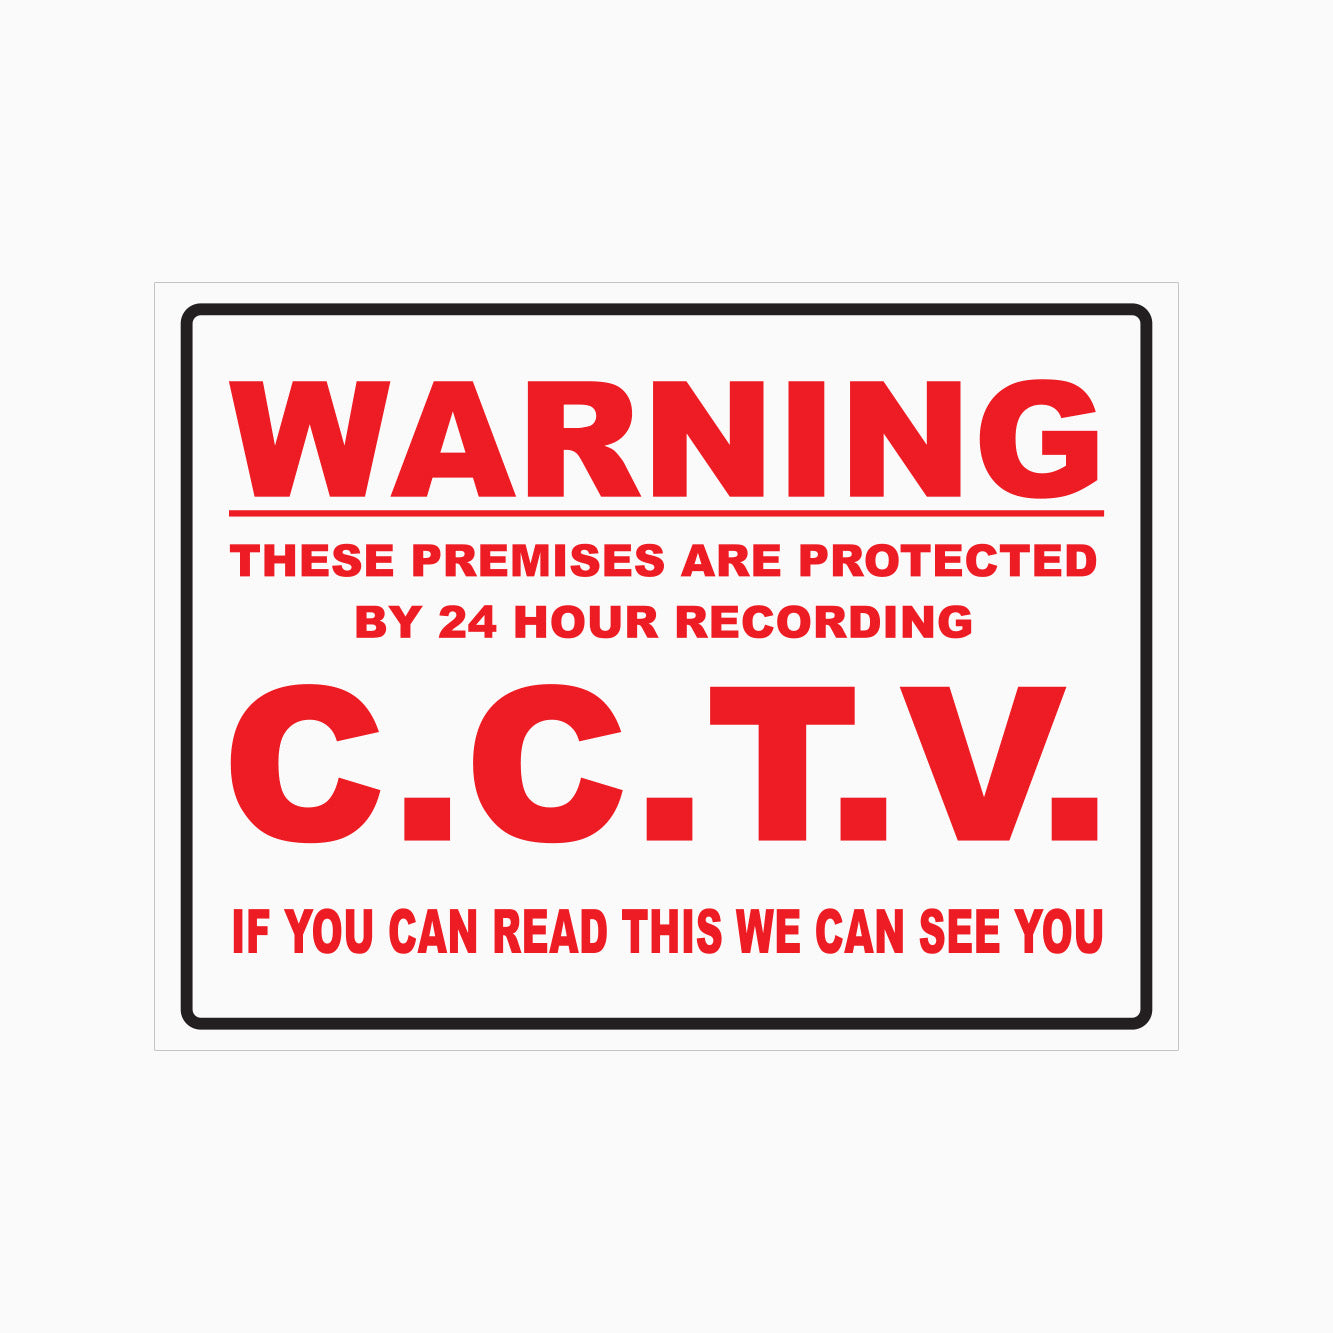 WARNING THESE PREMISES ARE PROTECTED BY 24 HOUR RECORDING. C.C.T.V. IF YOU CAN READ THIS WE CAN SEE YOU SIGN